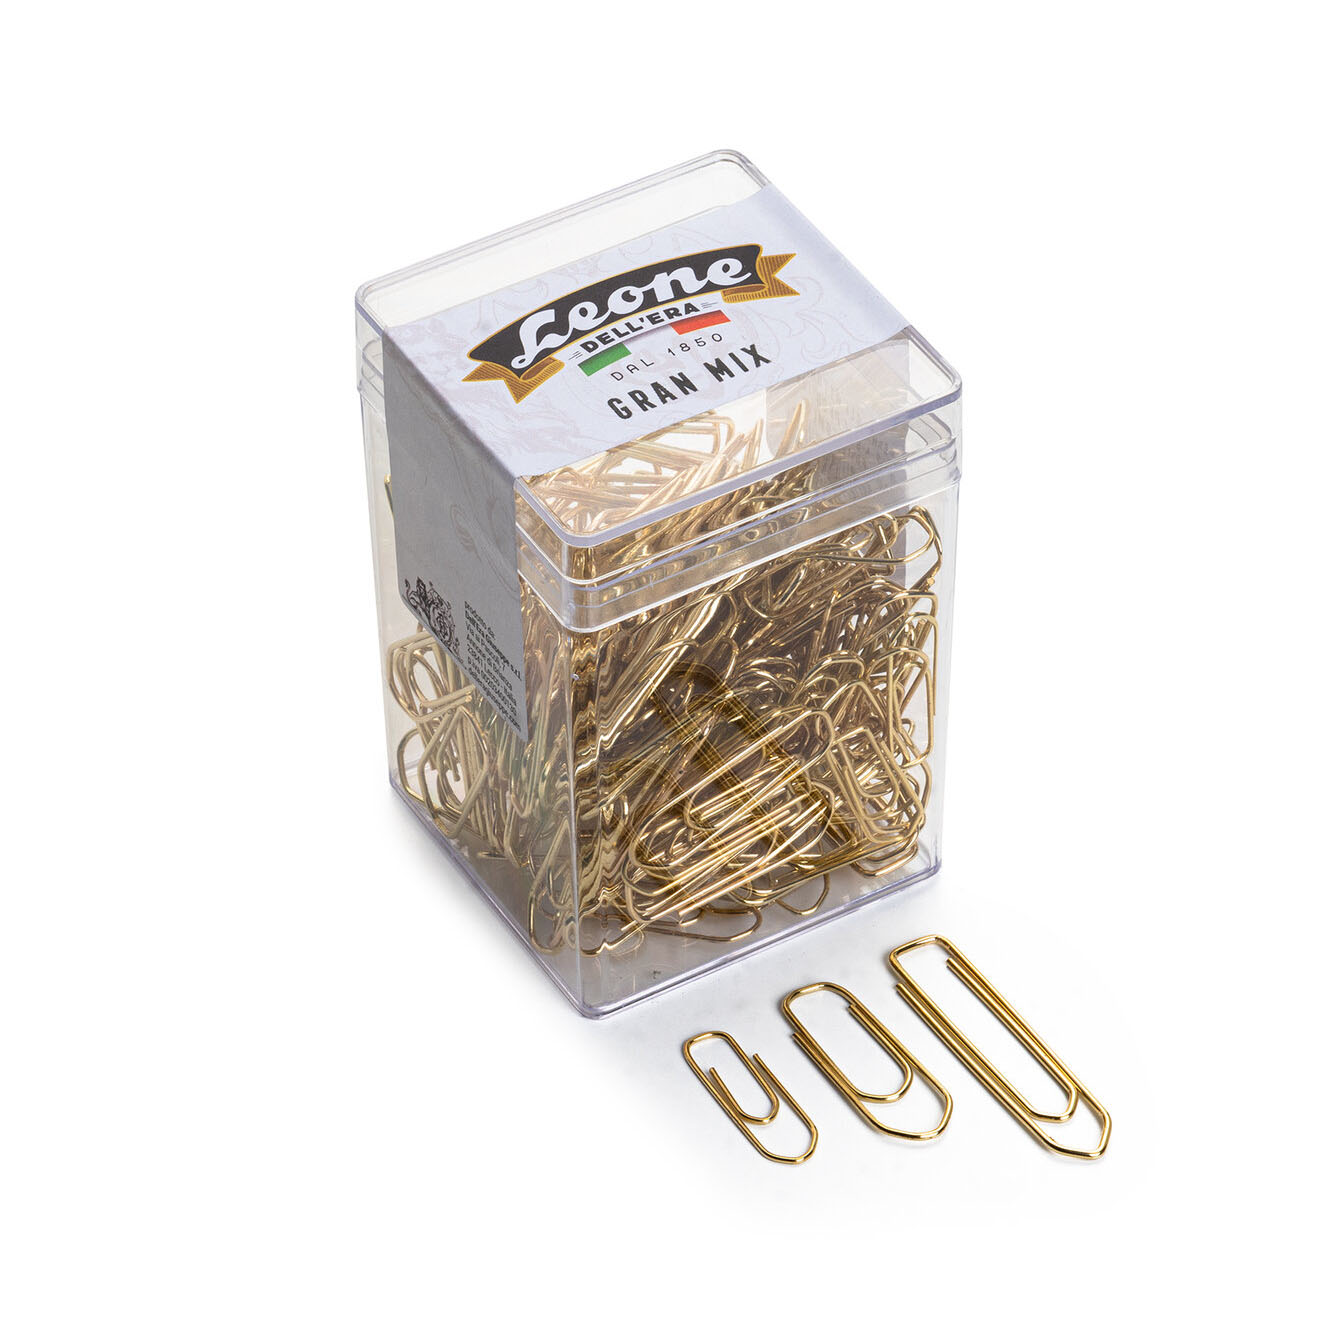 Leone Dell'era brass paper clips mixed set, made in italy